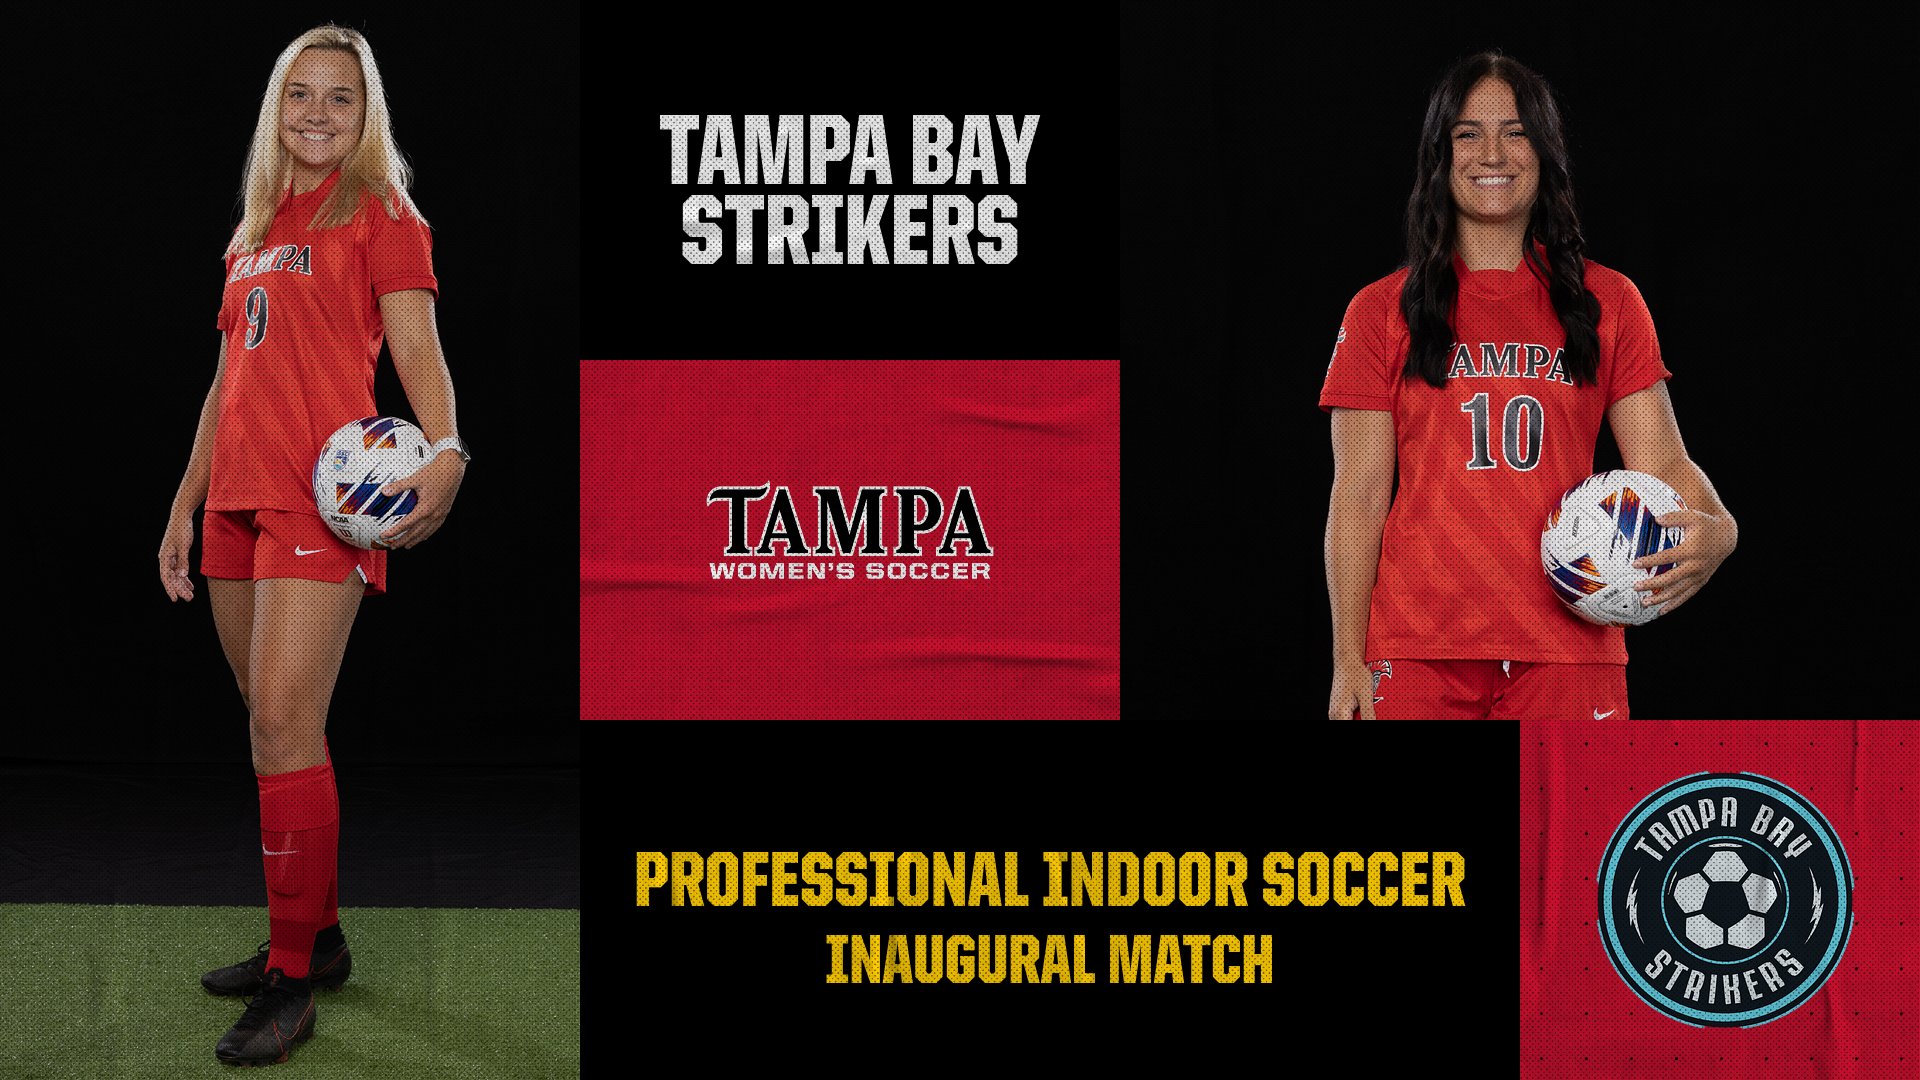 Katherine Hostage, Stephanie deLaforcade Star in Tampa Bay Strikers First-Ever Match